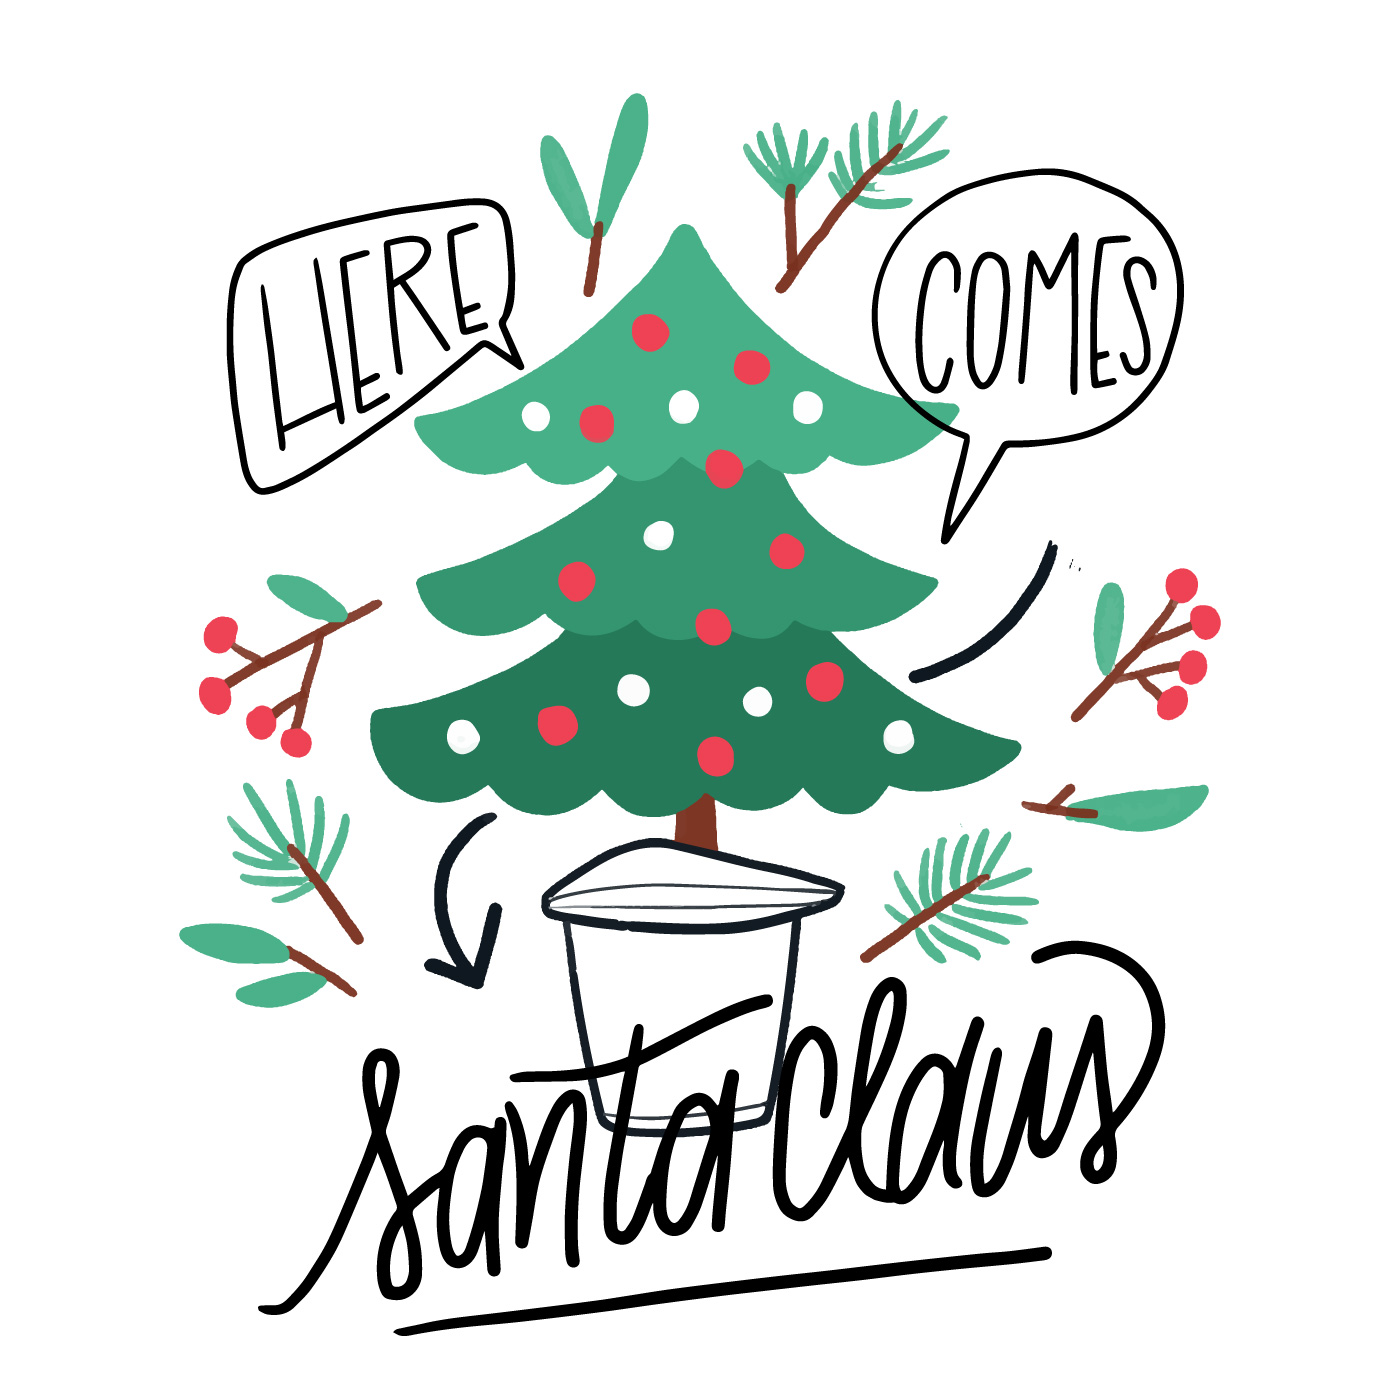 Download Cute Christmas Tree, Leaves, Flowers And Lettering ...